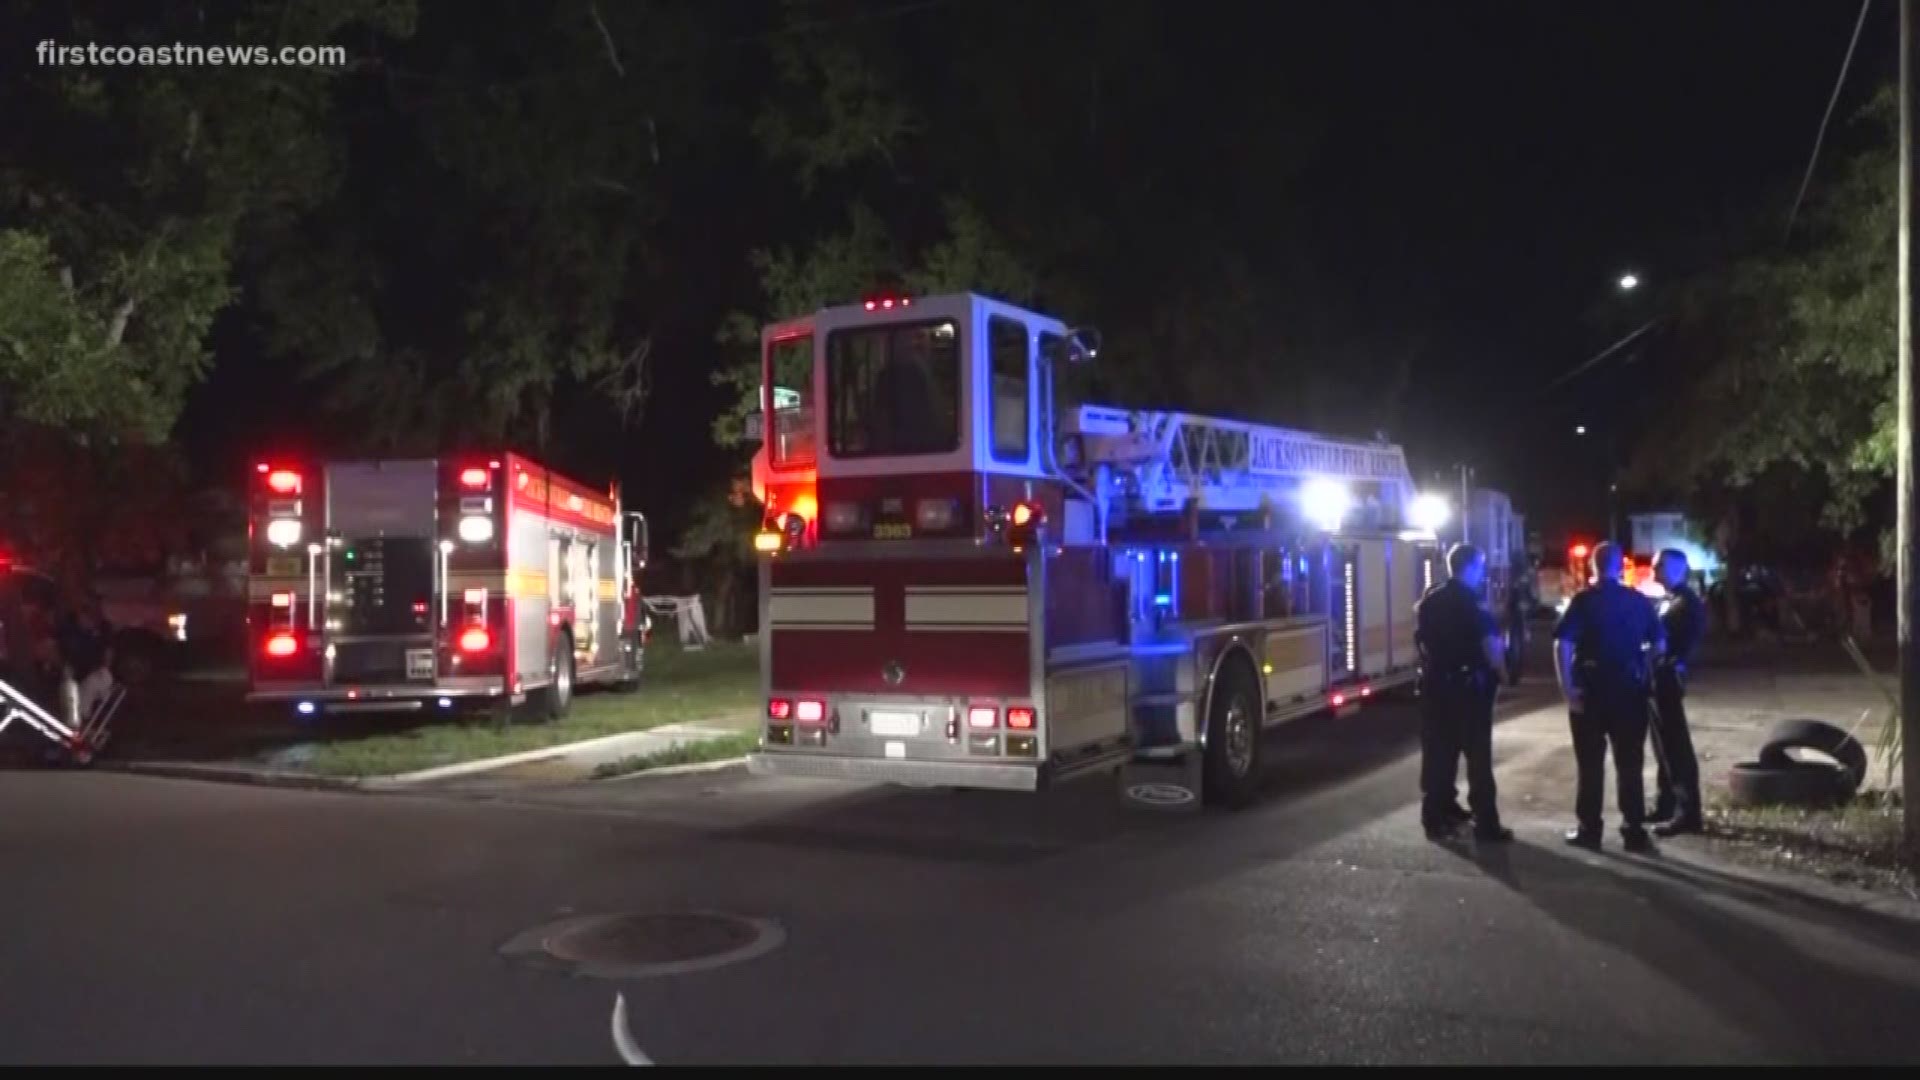 The fire happened in the 3800 block of Laurie Street before 5 a.m., according to the Jacksonville Fire and Rescue Department.